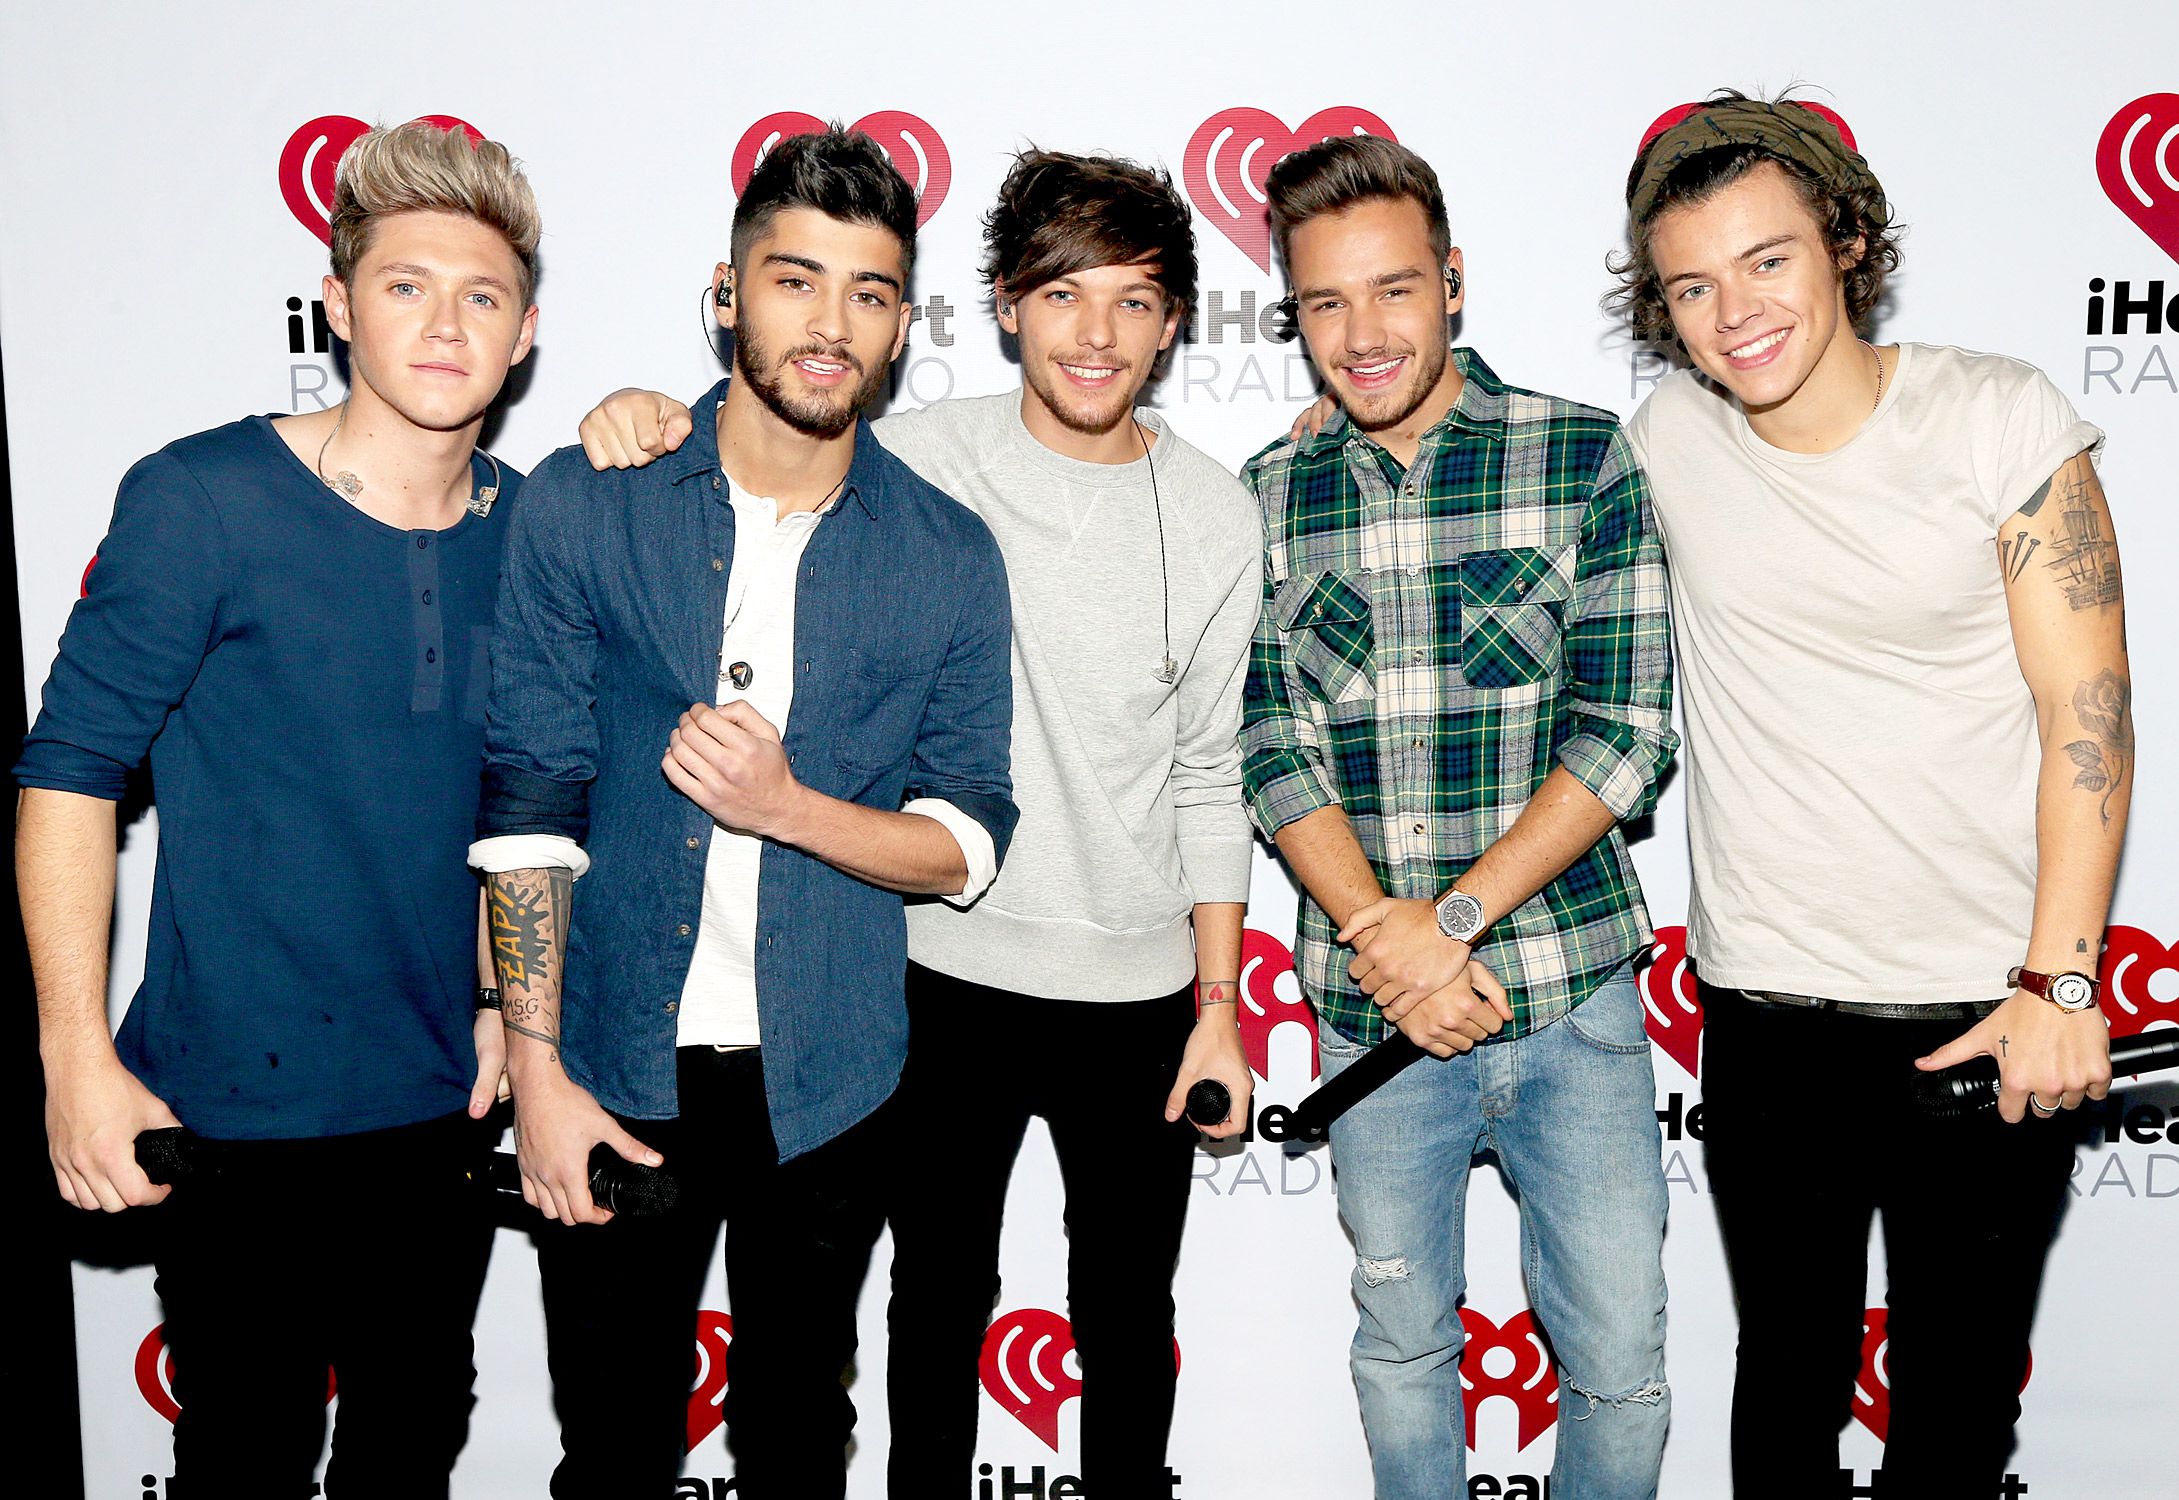 One Direction Wallpaper HD